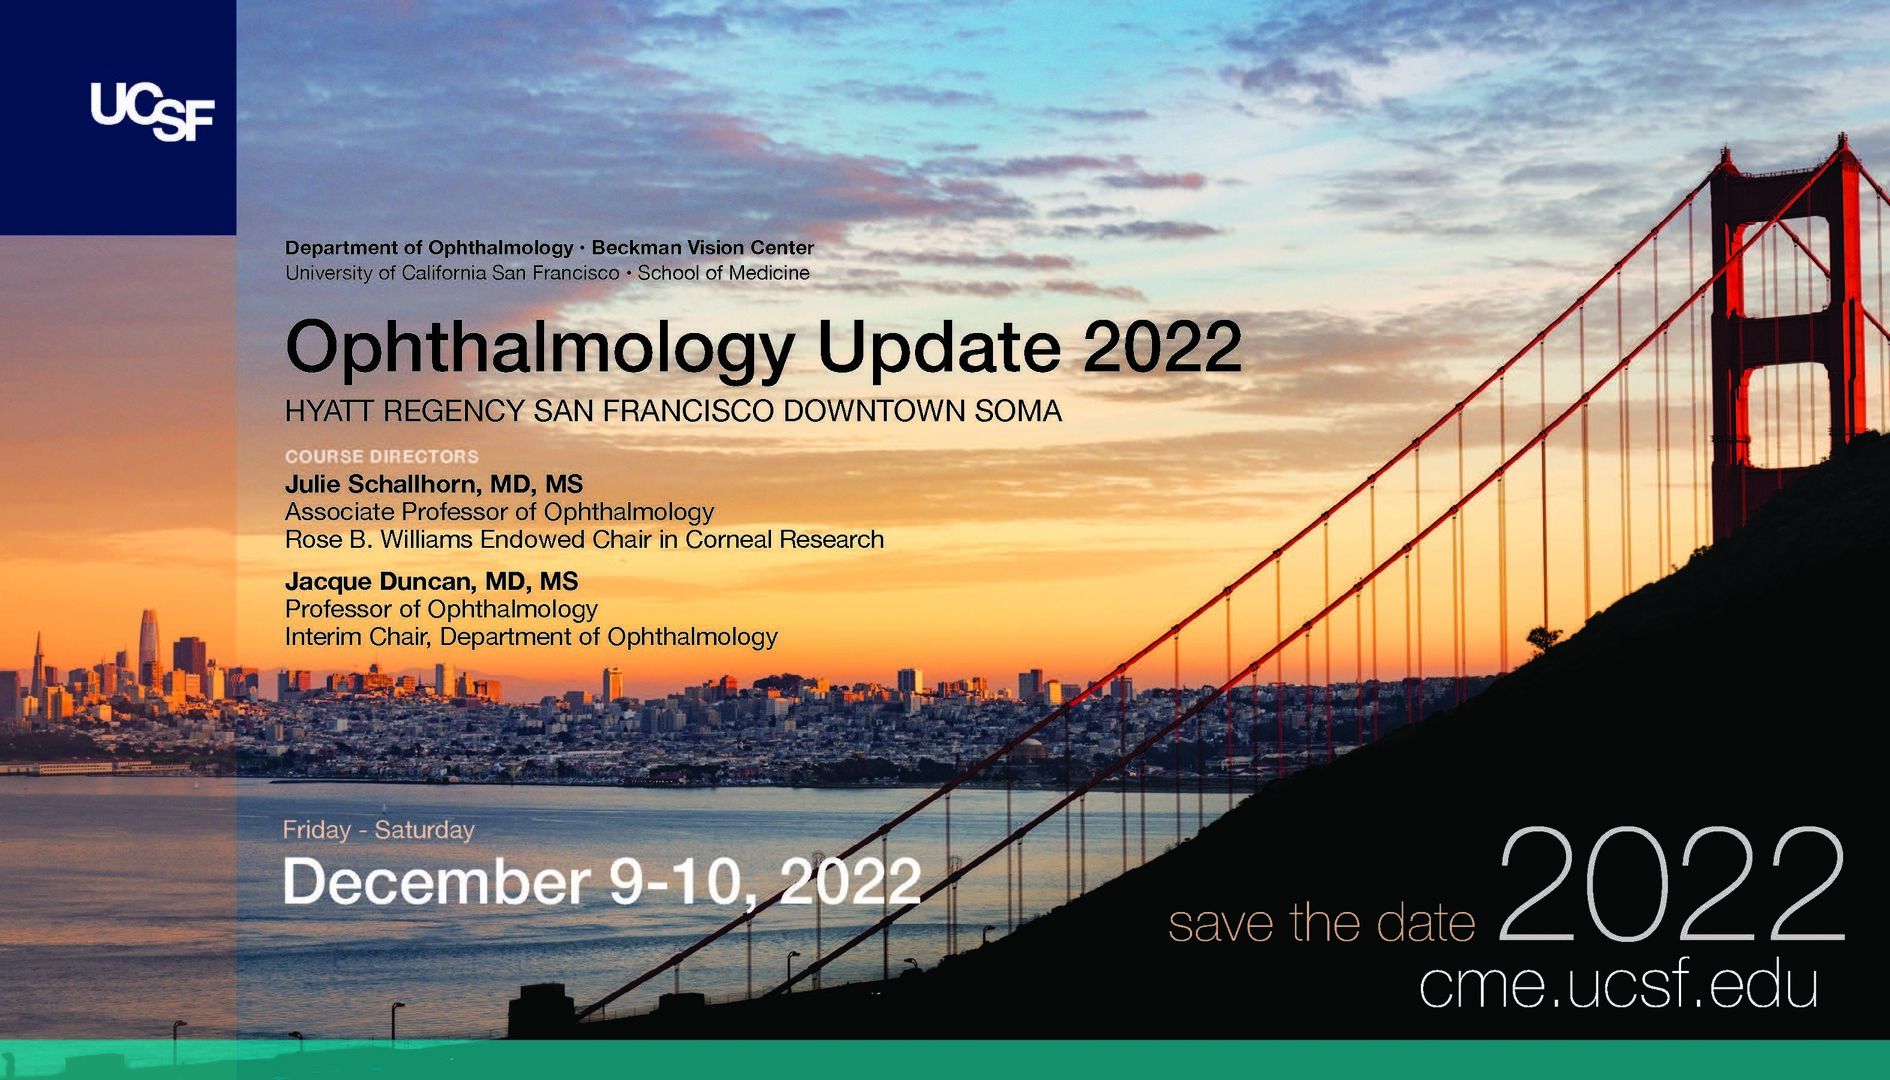 Ophthalmology Update 2022